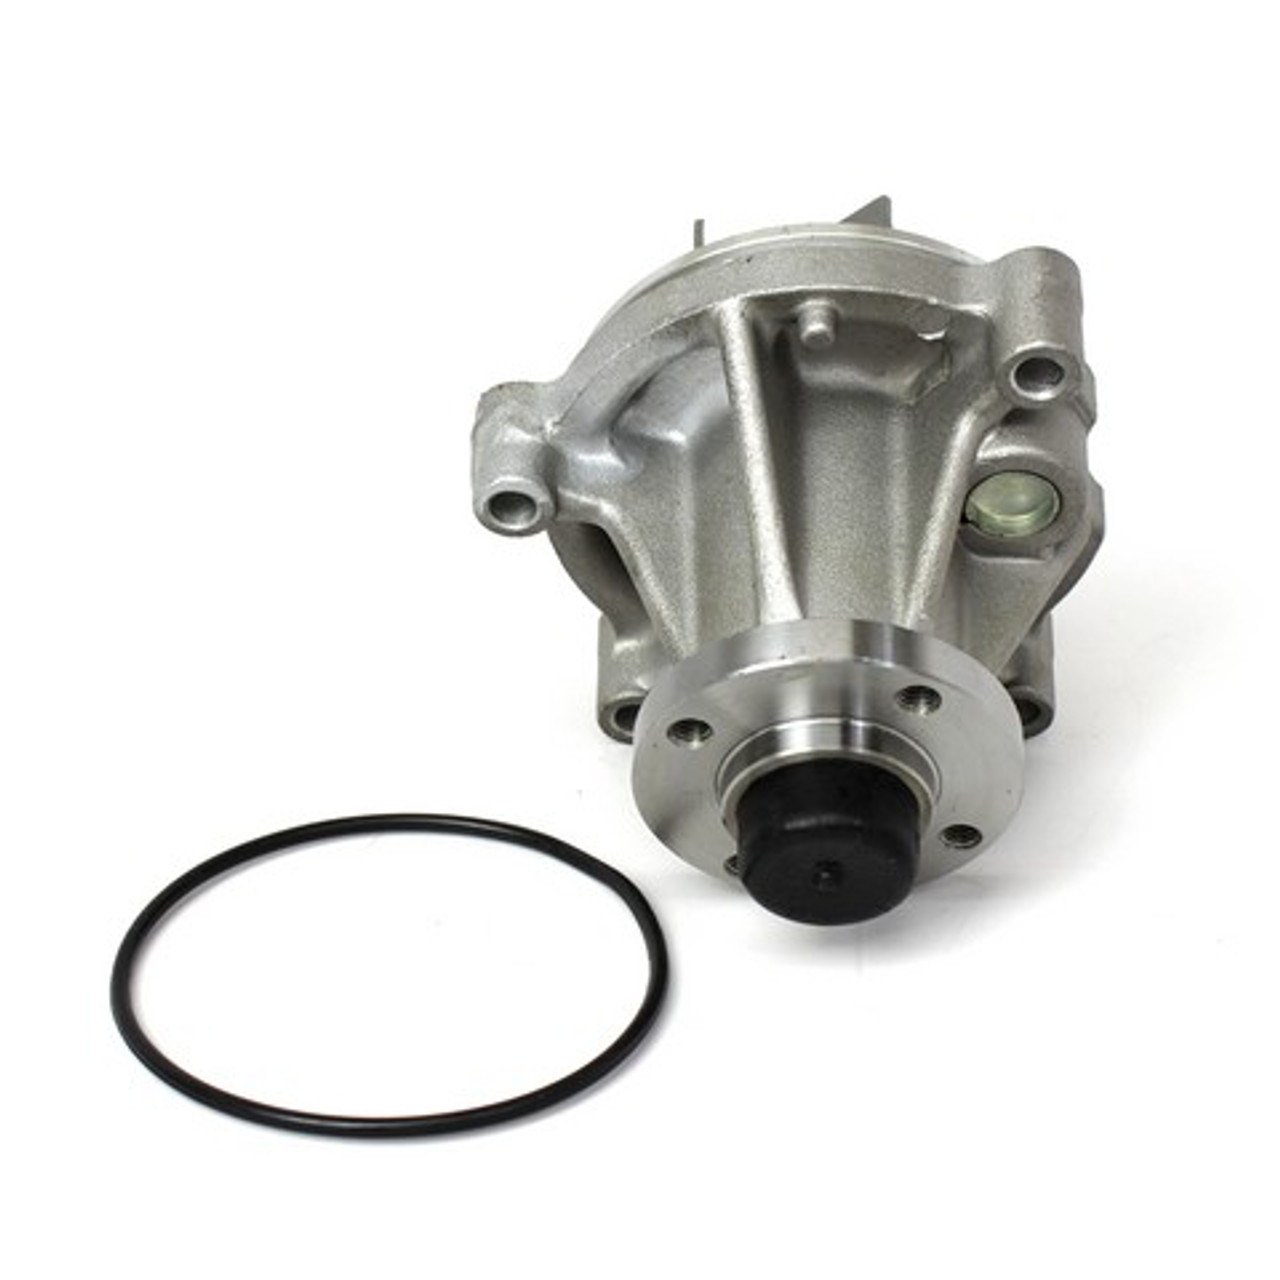 Water Pump 4.6L 2004 Ford F-150 Heritage - WP4170.95